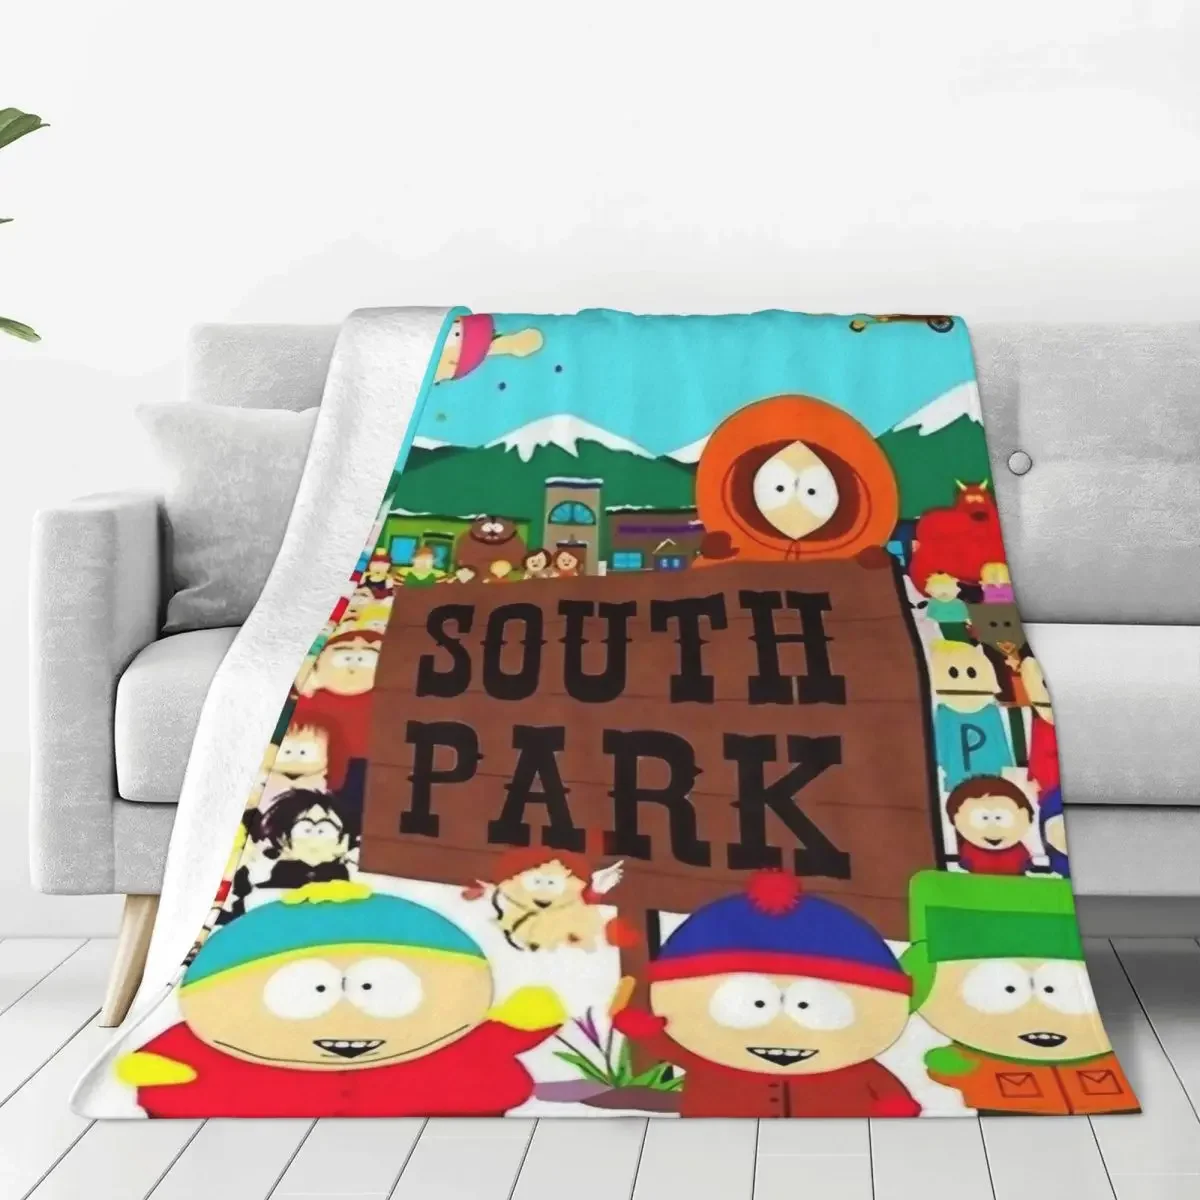 

SouthPark Cartoon All Characters Fuzzy Blankets Vintage Throw Blankets for Home 200x150cm Plush Thin Quilt